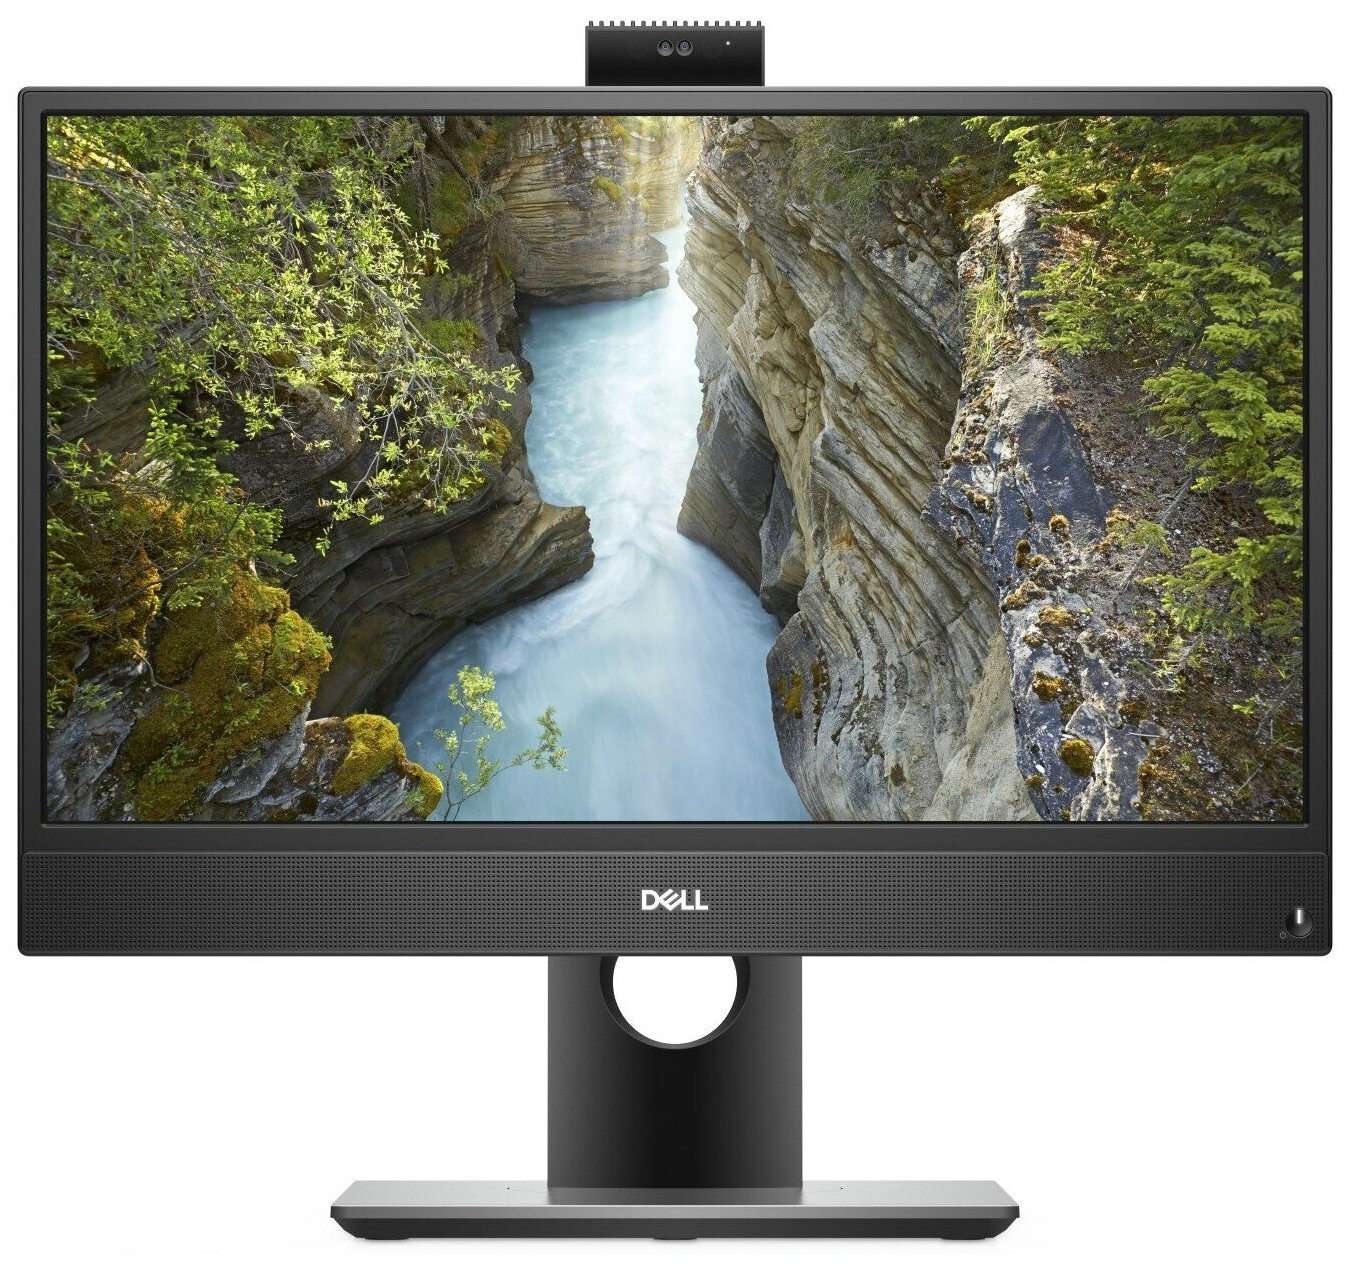  Dell Optiplex 3280-6611 AIO Core i5-10500T (2,3GHz) 21,5'' FullHD (1920x1080) IPS AG Non-Touch 8GB (1x8GB) DDR4 256GB SSD Intel UHD 630 Height Adjustable Stand, TPM W10 Pro 3y NBD